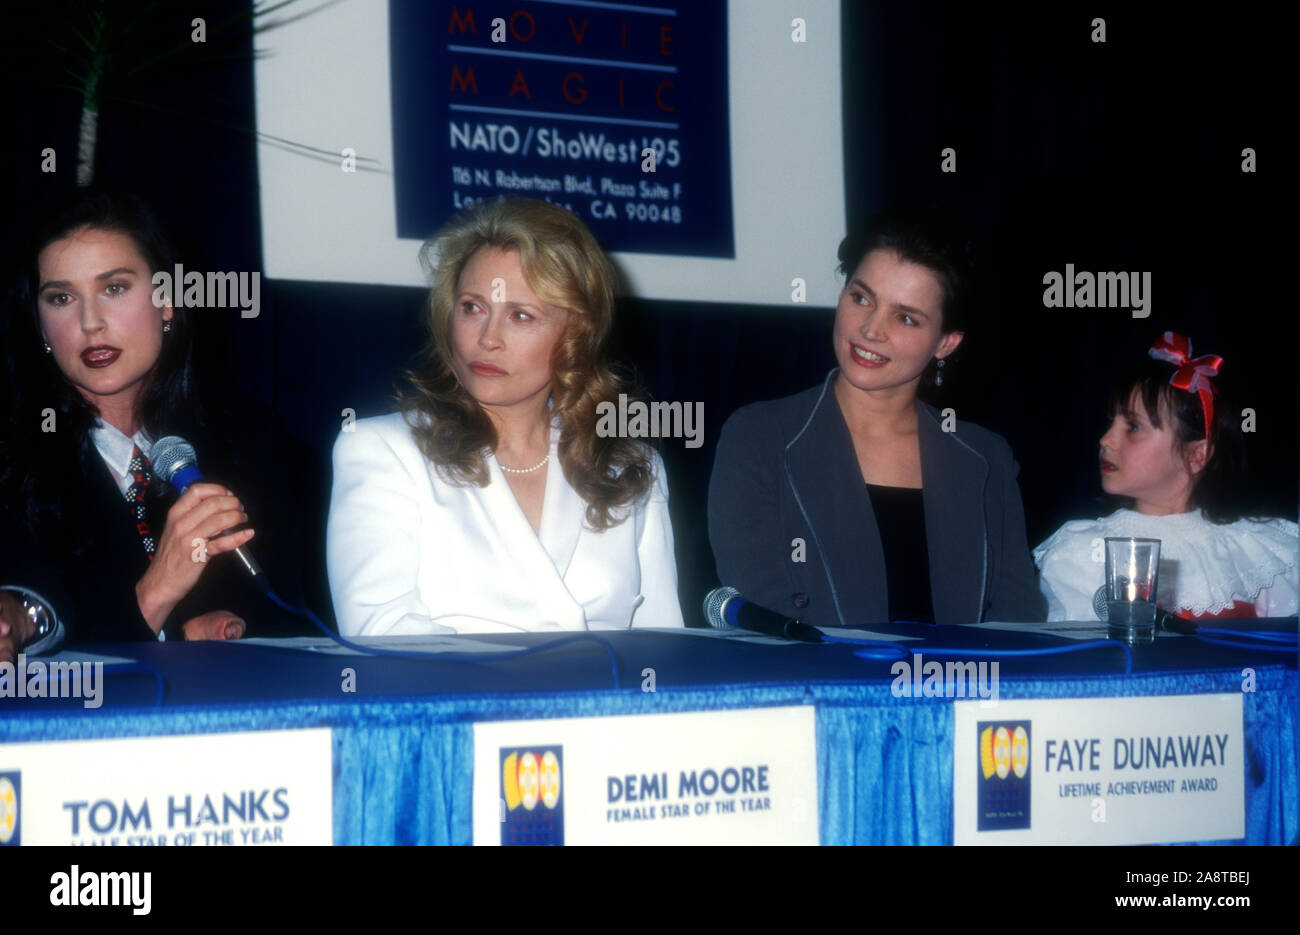 Las Vegas, Nevada, USA 9th March 1995 Actress Demi Moore, actress Faye Dunaway, actress Julia Ormond and actress Mara Wilson attend the 1995 NATO/ShoWest Convention on March 9, 1995 at Bally's Hotel & Casino in Las Vegas, Nevada, USA. Photo by Barry King/Alamy Stock Photo Stock Photo